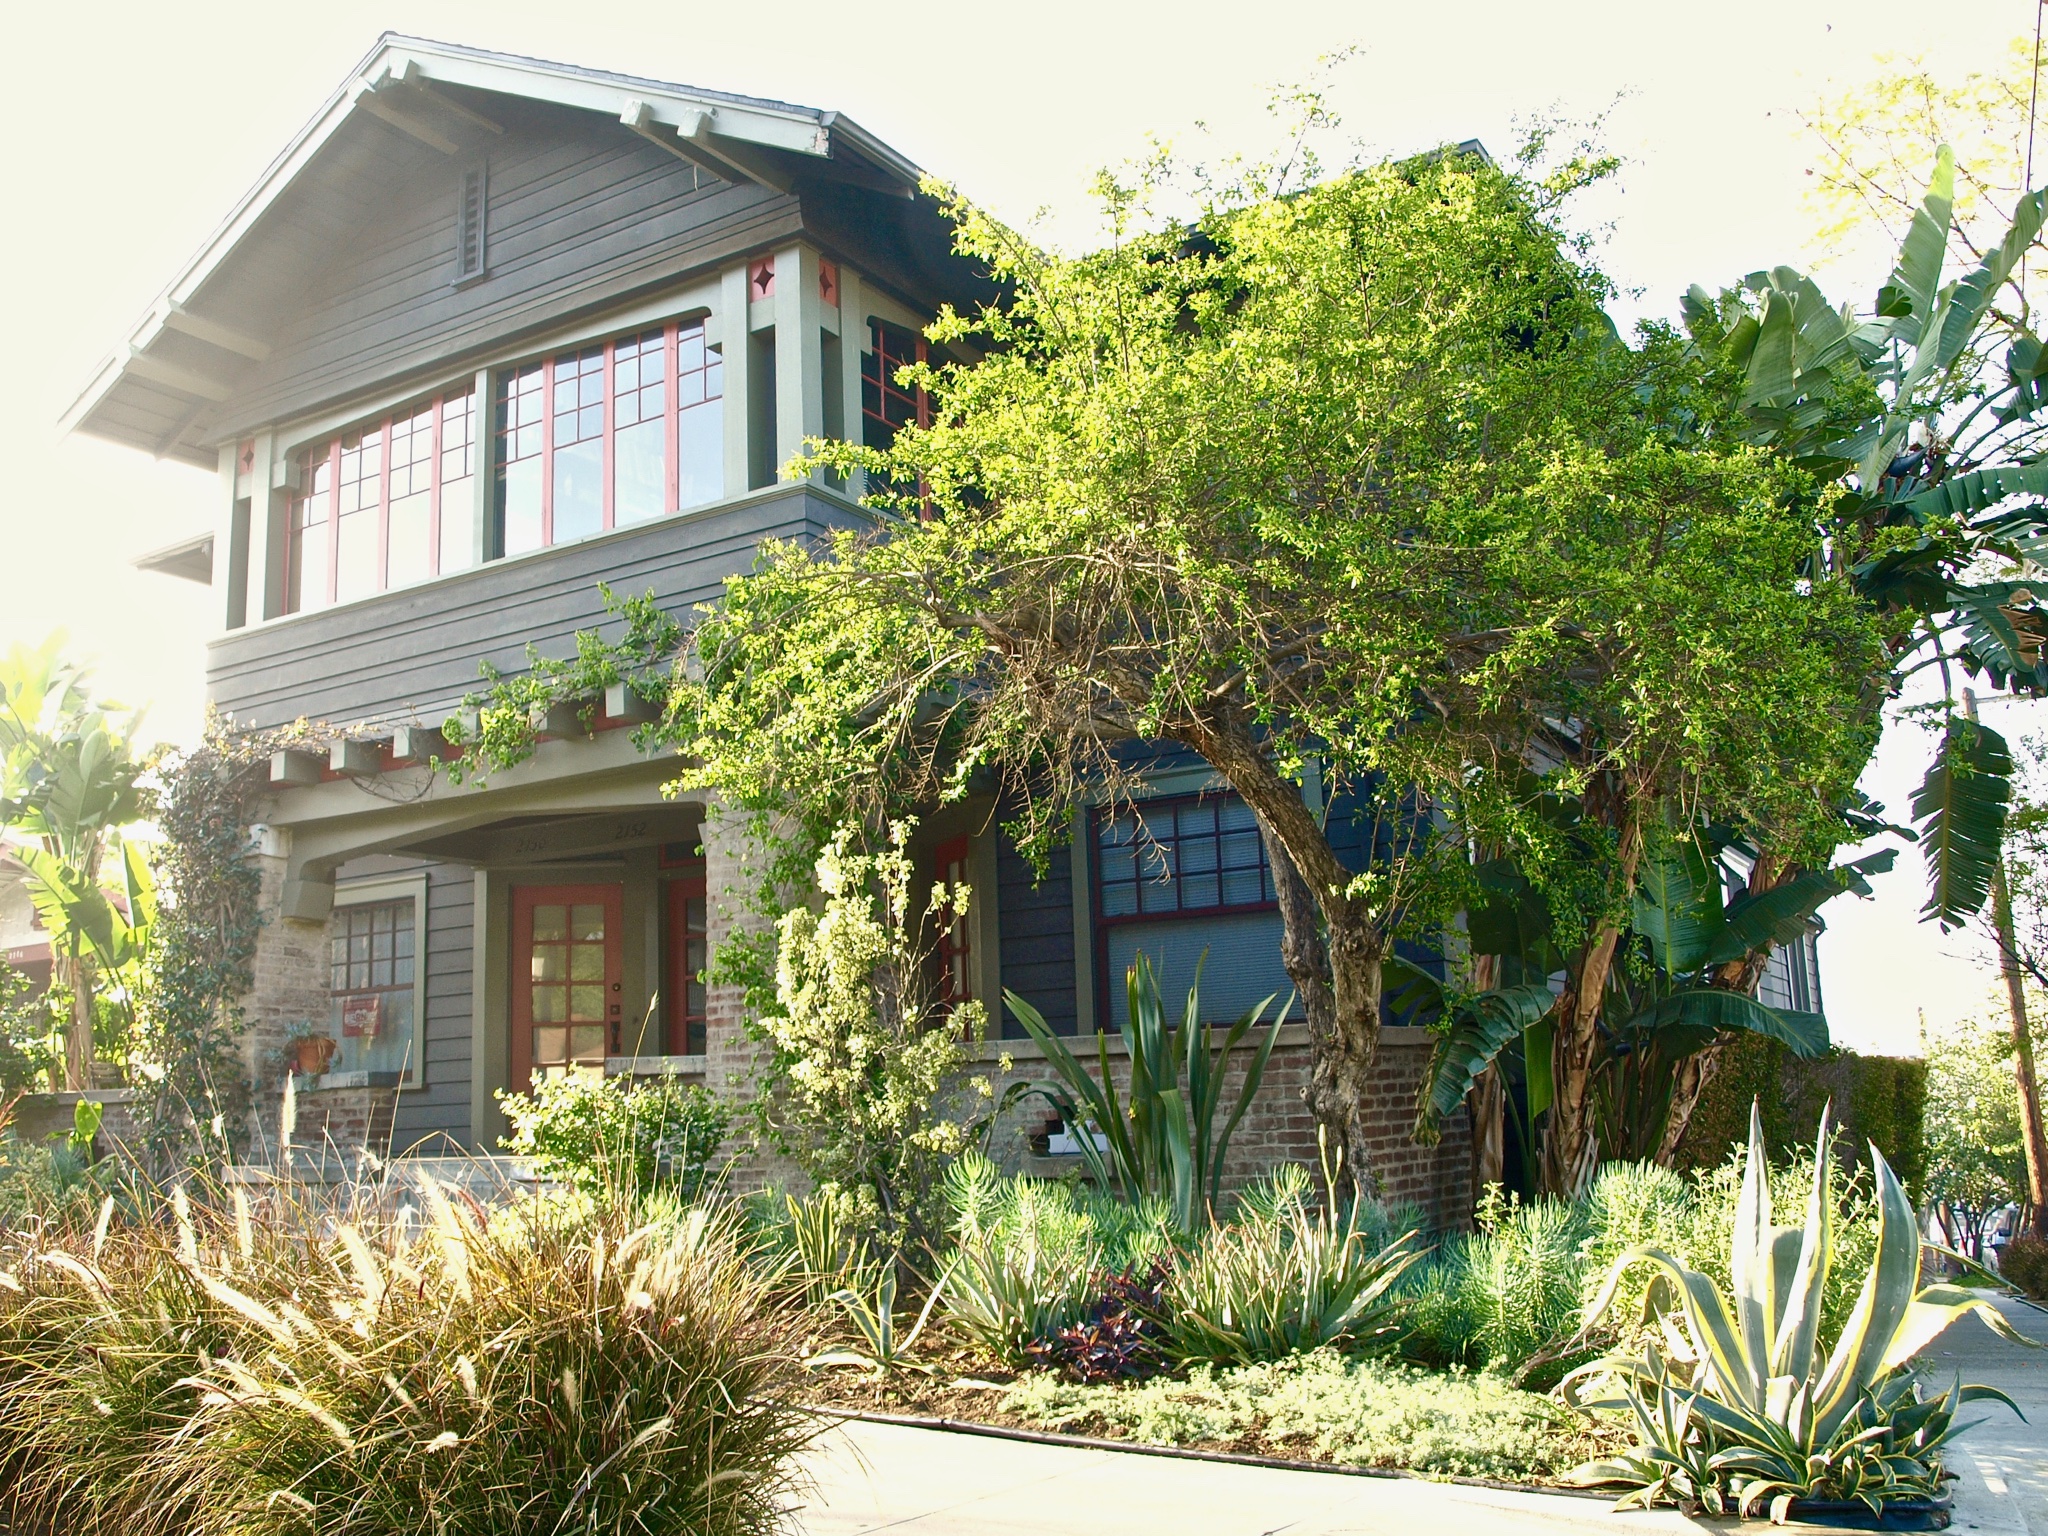 Phil Missig - Real Estate - Investment Property - Echo Park - Silver Lake - Craftsman - Architecture